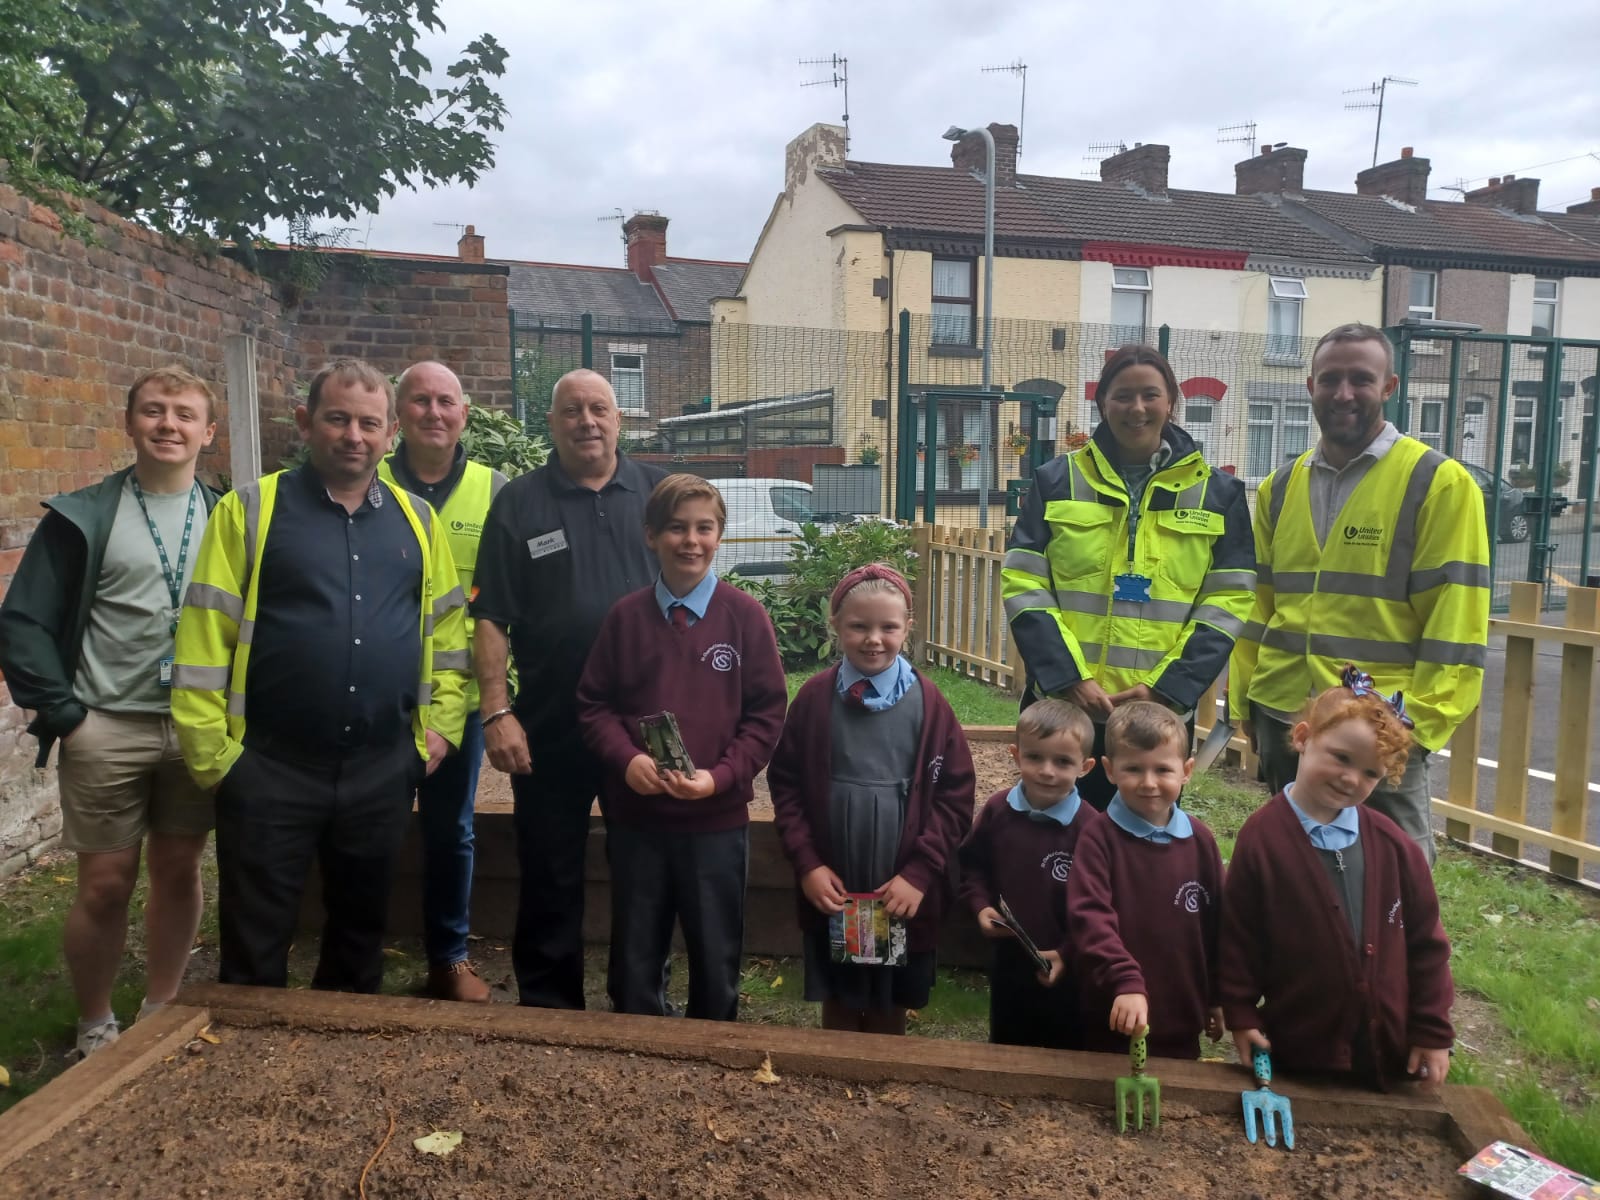 St Charles’ pupils and teachers with United Utilities, Morrison Water Services, B&Q and Travis Perkins, at the new school garden